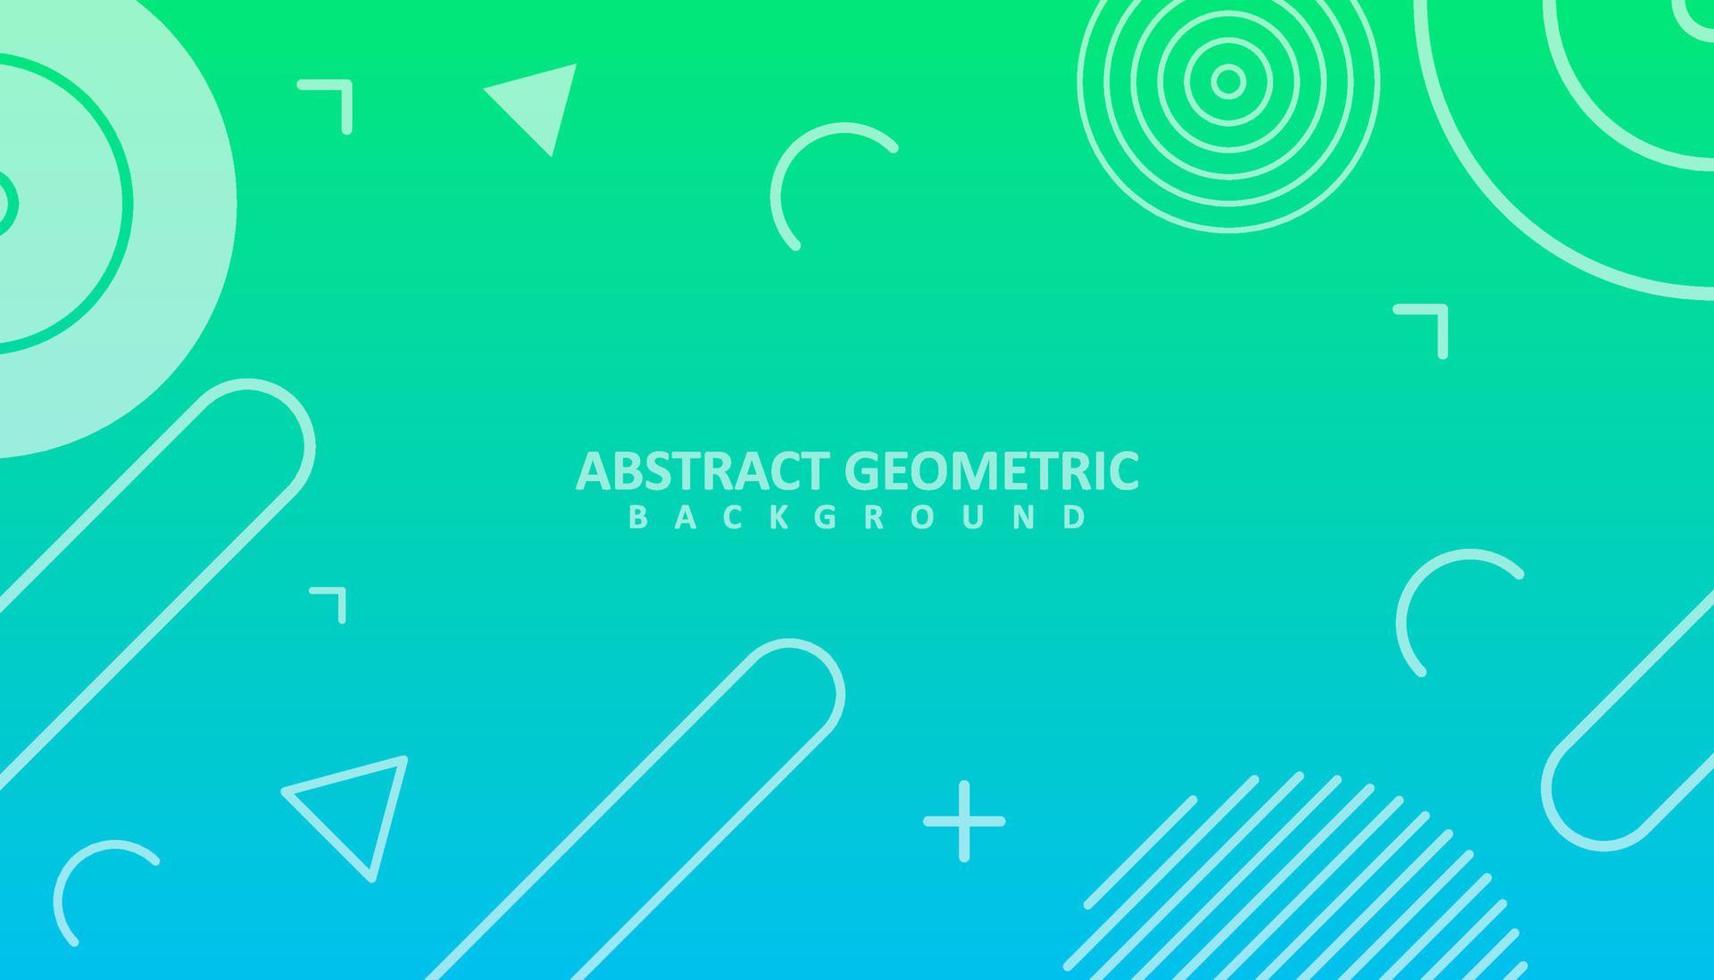 Blue and green geometric background design vector